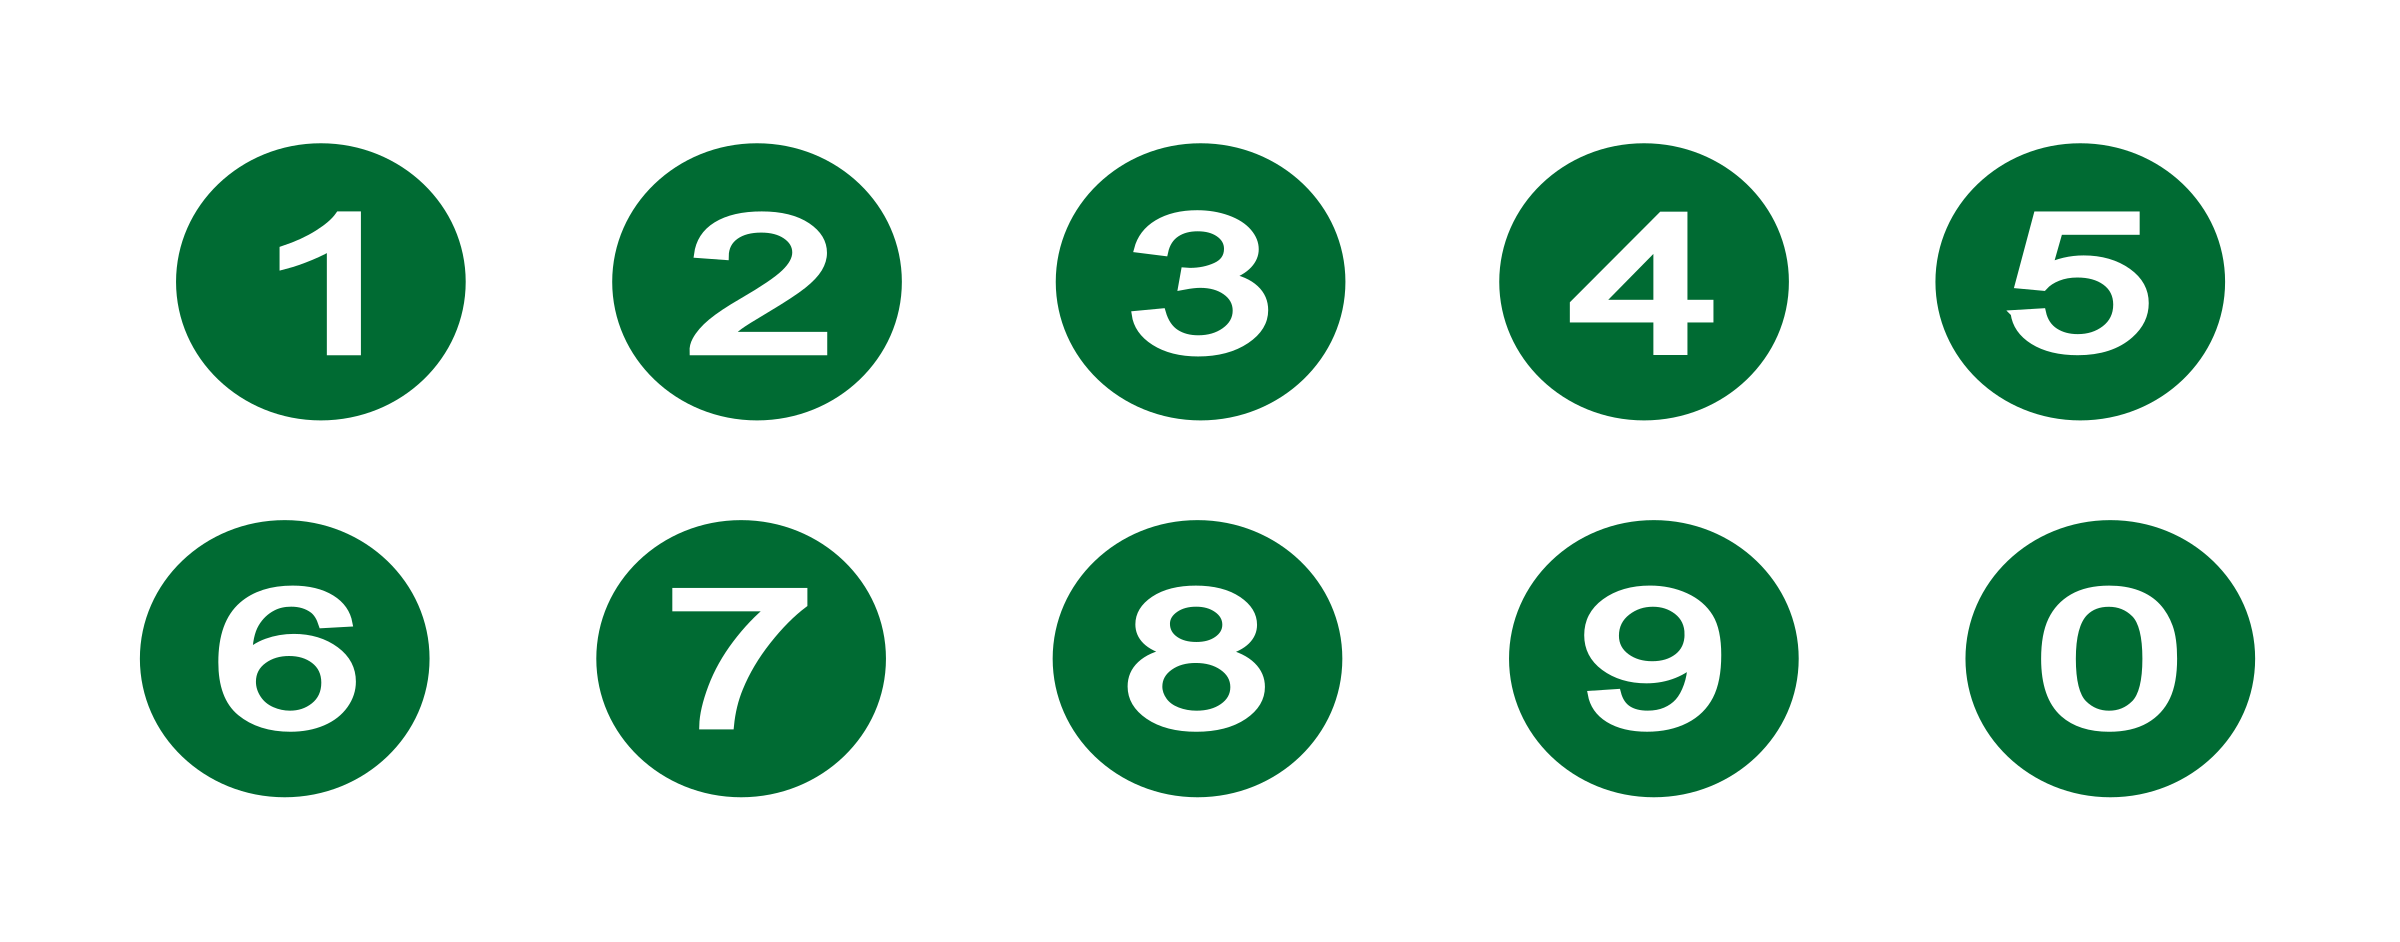 Clipart numbers in circles